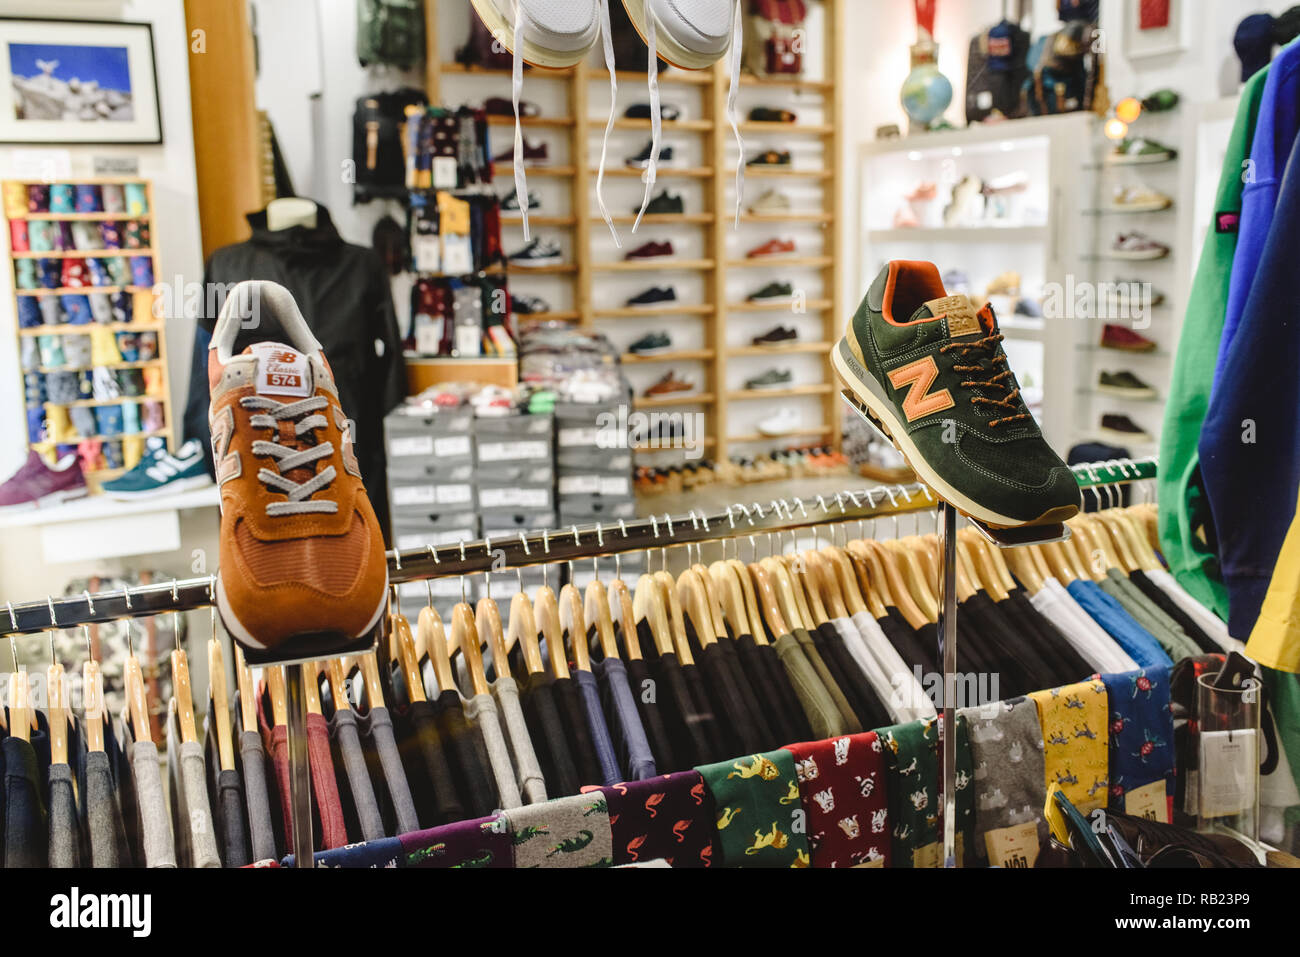 Valencia, Spain - January 2, 2019: New Balance sneakers shown in shop window of a and clothing store on Avenida Colon in Valencia, Spain Stock Photo - Alamy